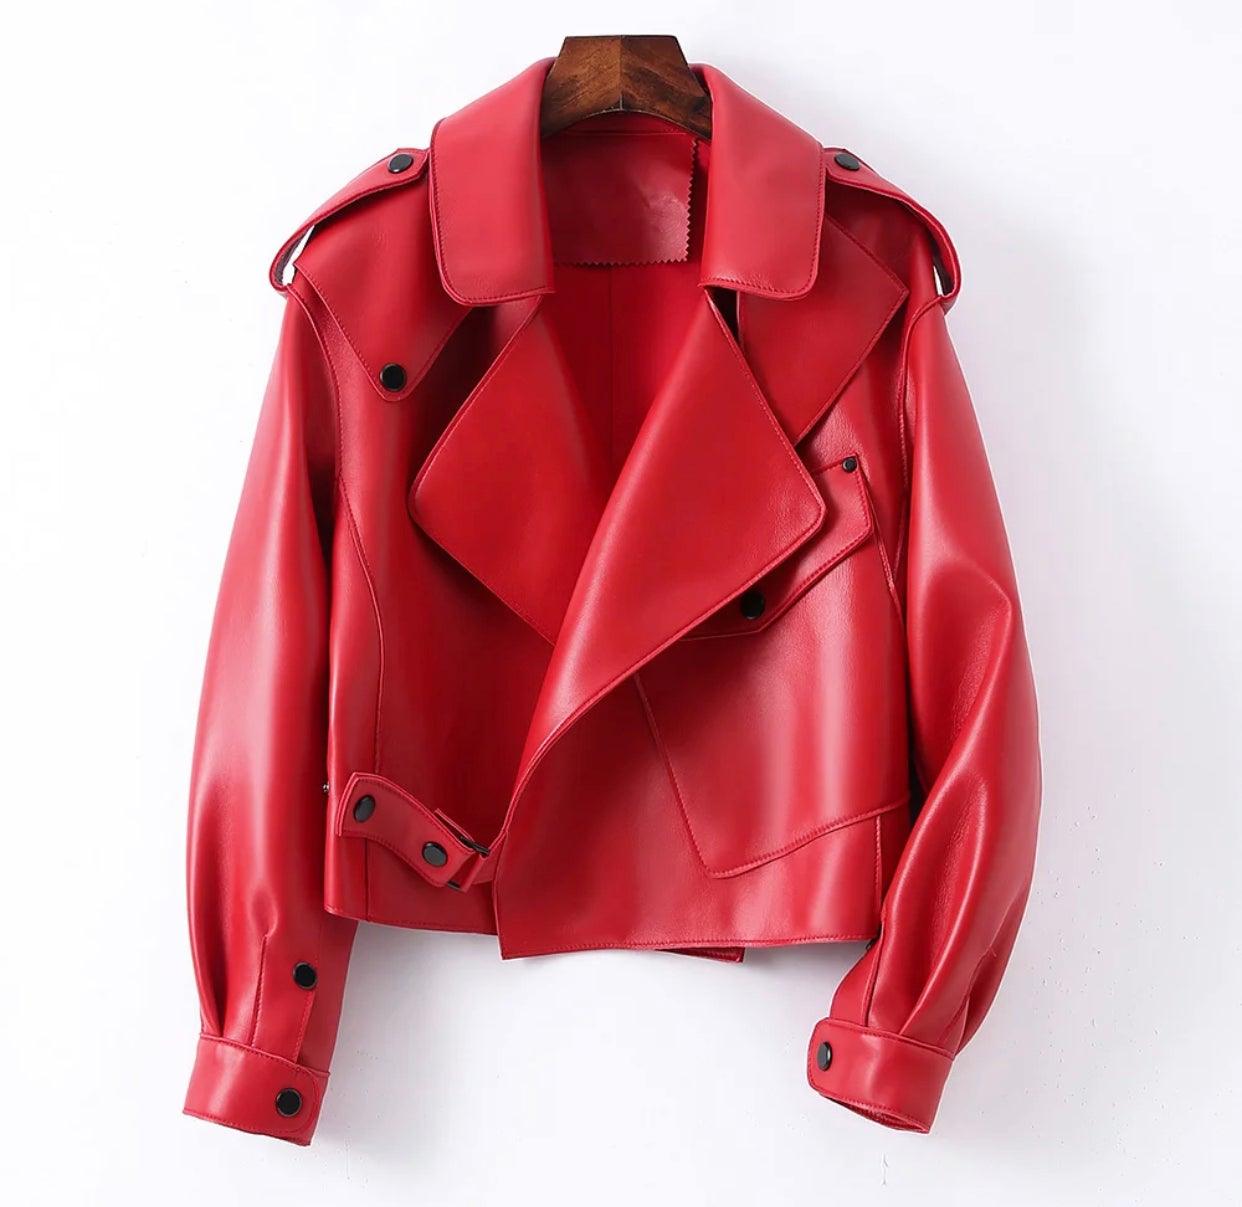 Miss Bomb - Red Leather jacket - Worthy Chic